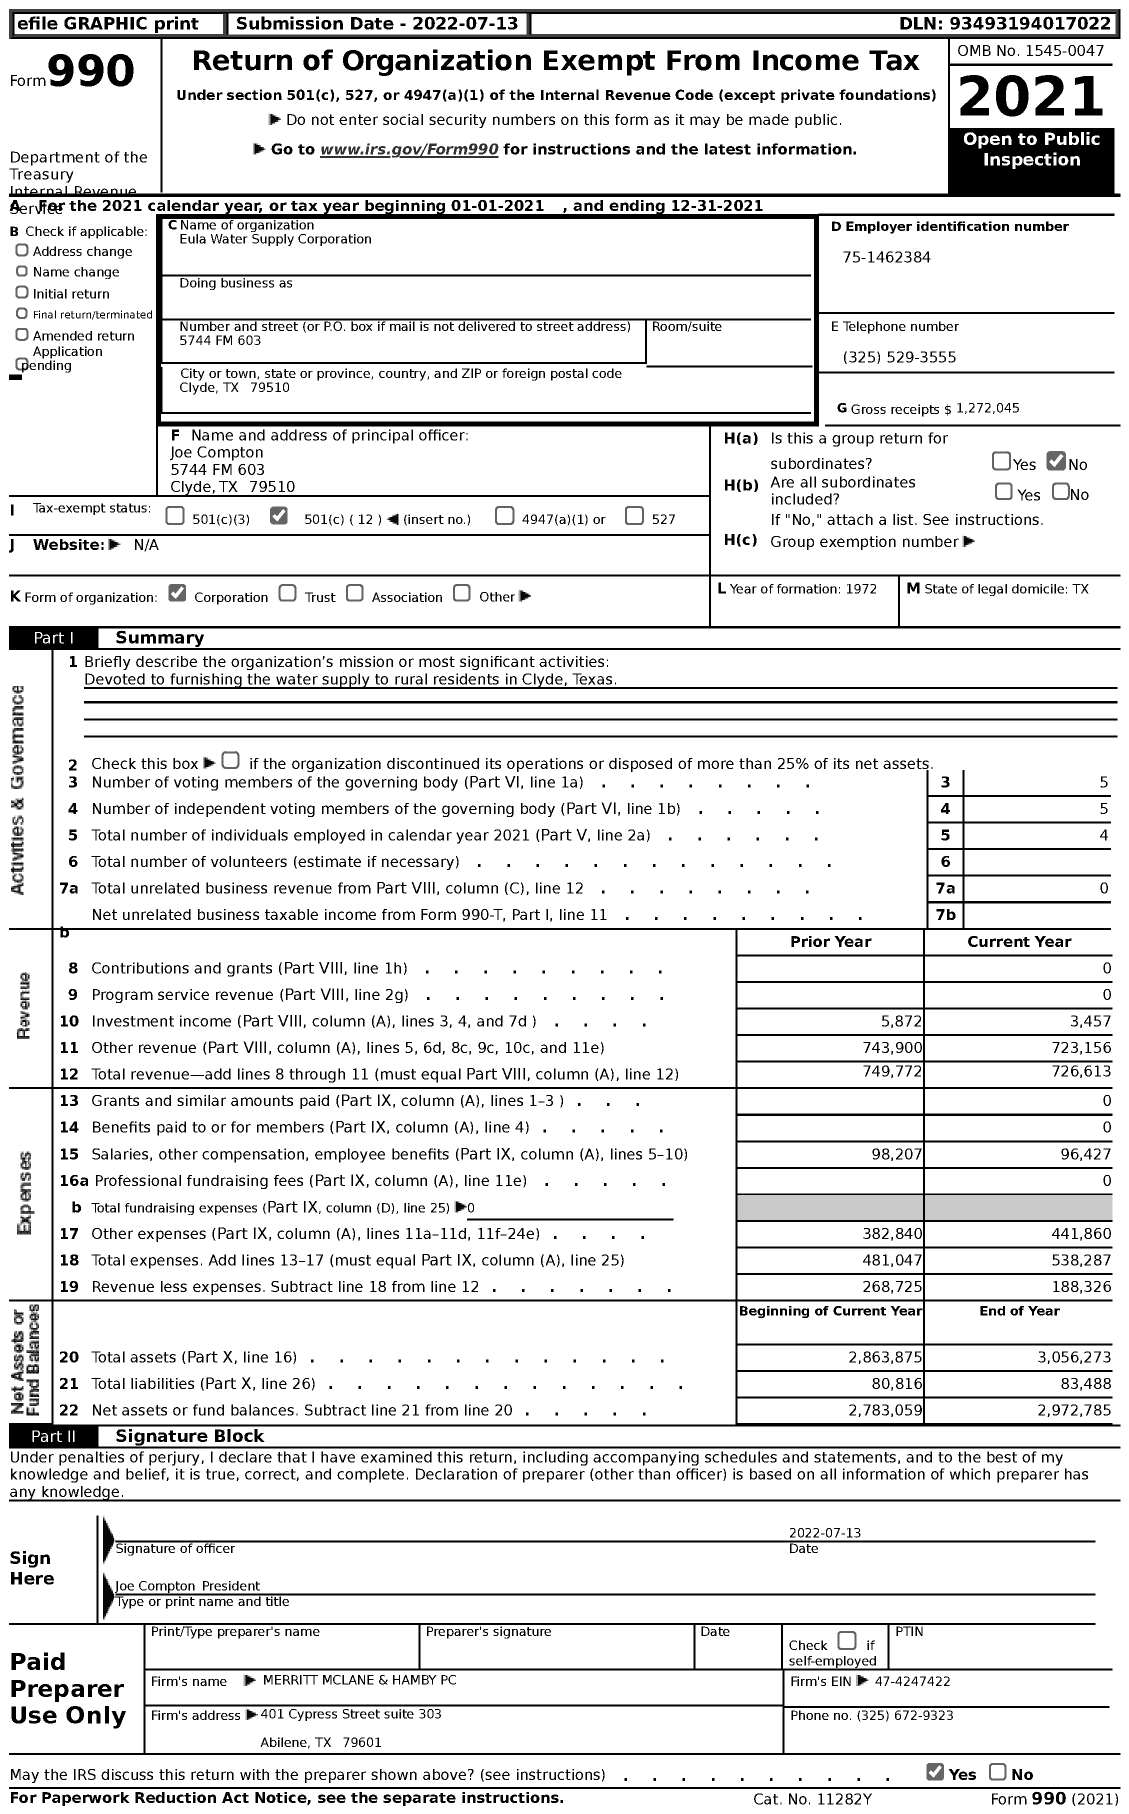 Image of first page of 2021 Form 990 for Eula Water Supply Corporation